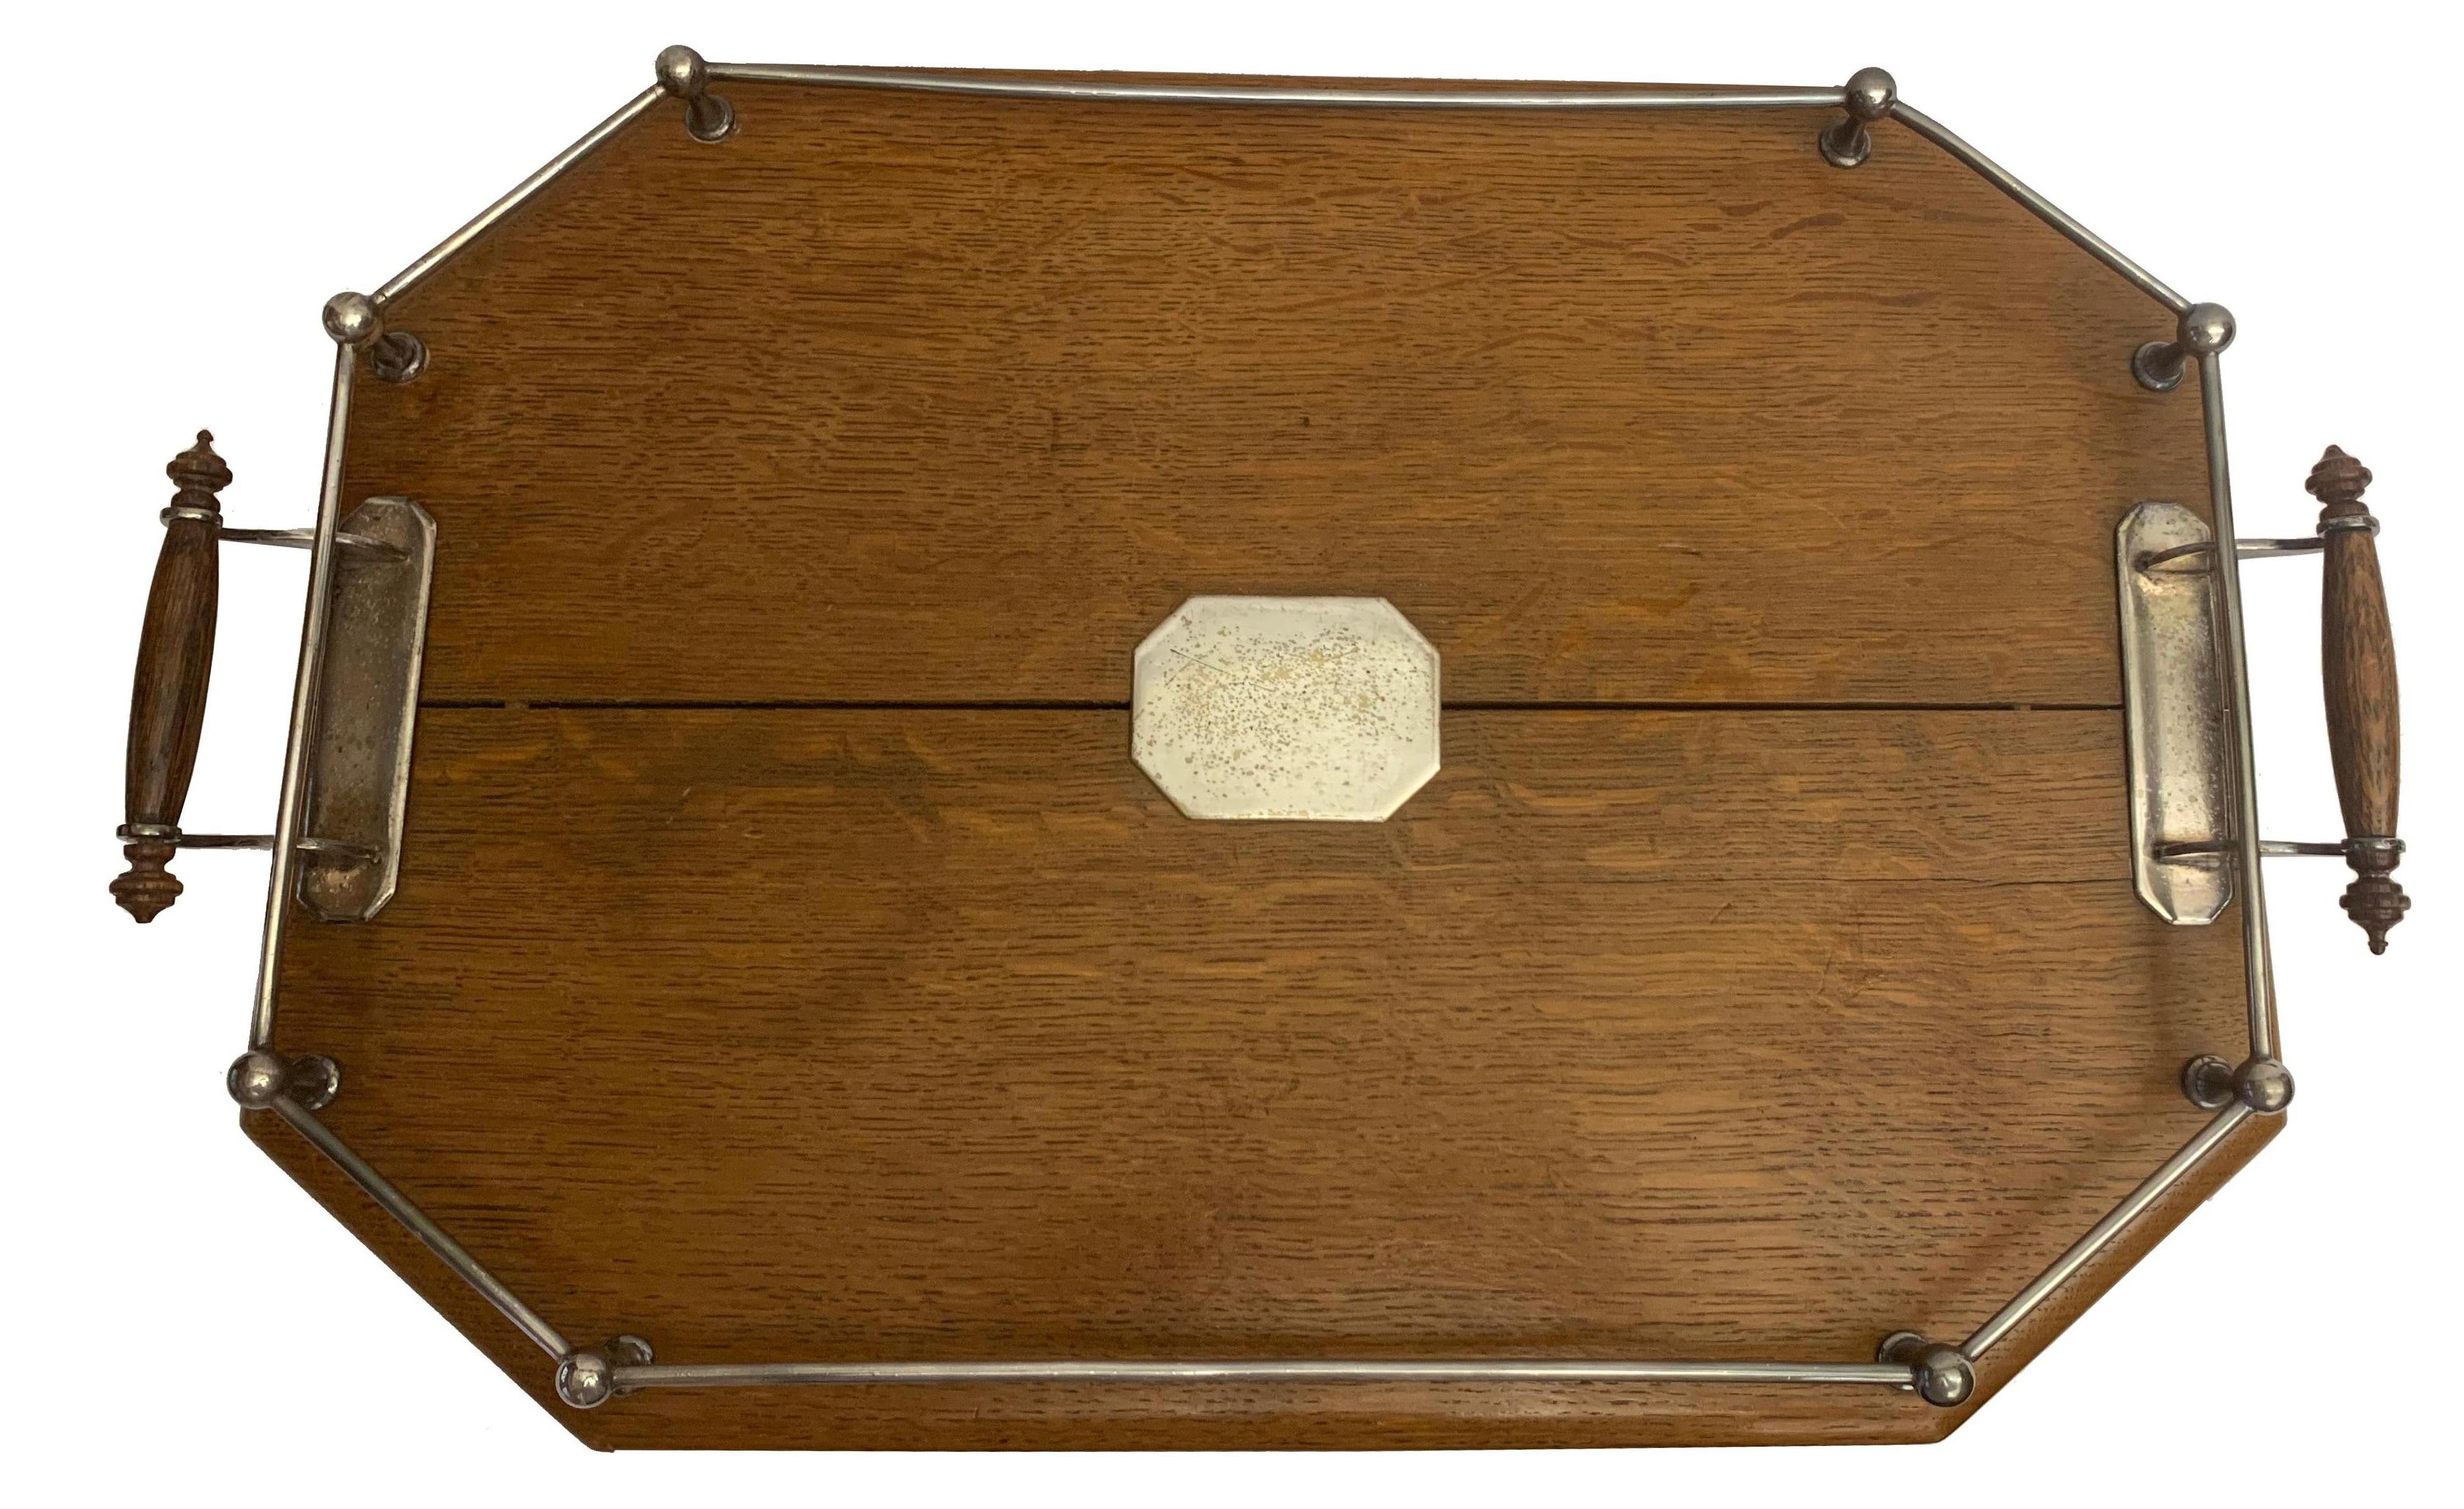 A beautiful 19th century oak and silver tea tray. 

Property from esteemed interior designer Juan Montoya. Juan Montoya is one of the most acclaimed and prolific interior designers in the world today. Juan Montoya was born and spent his early